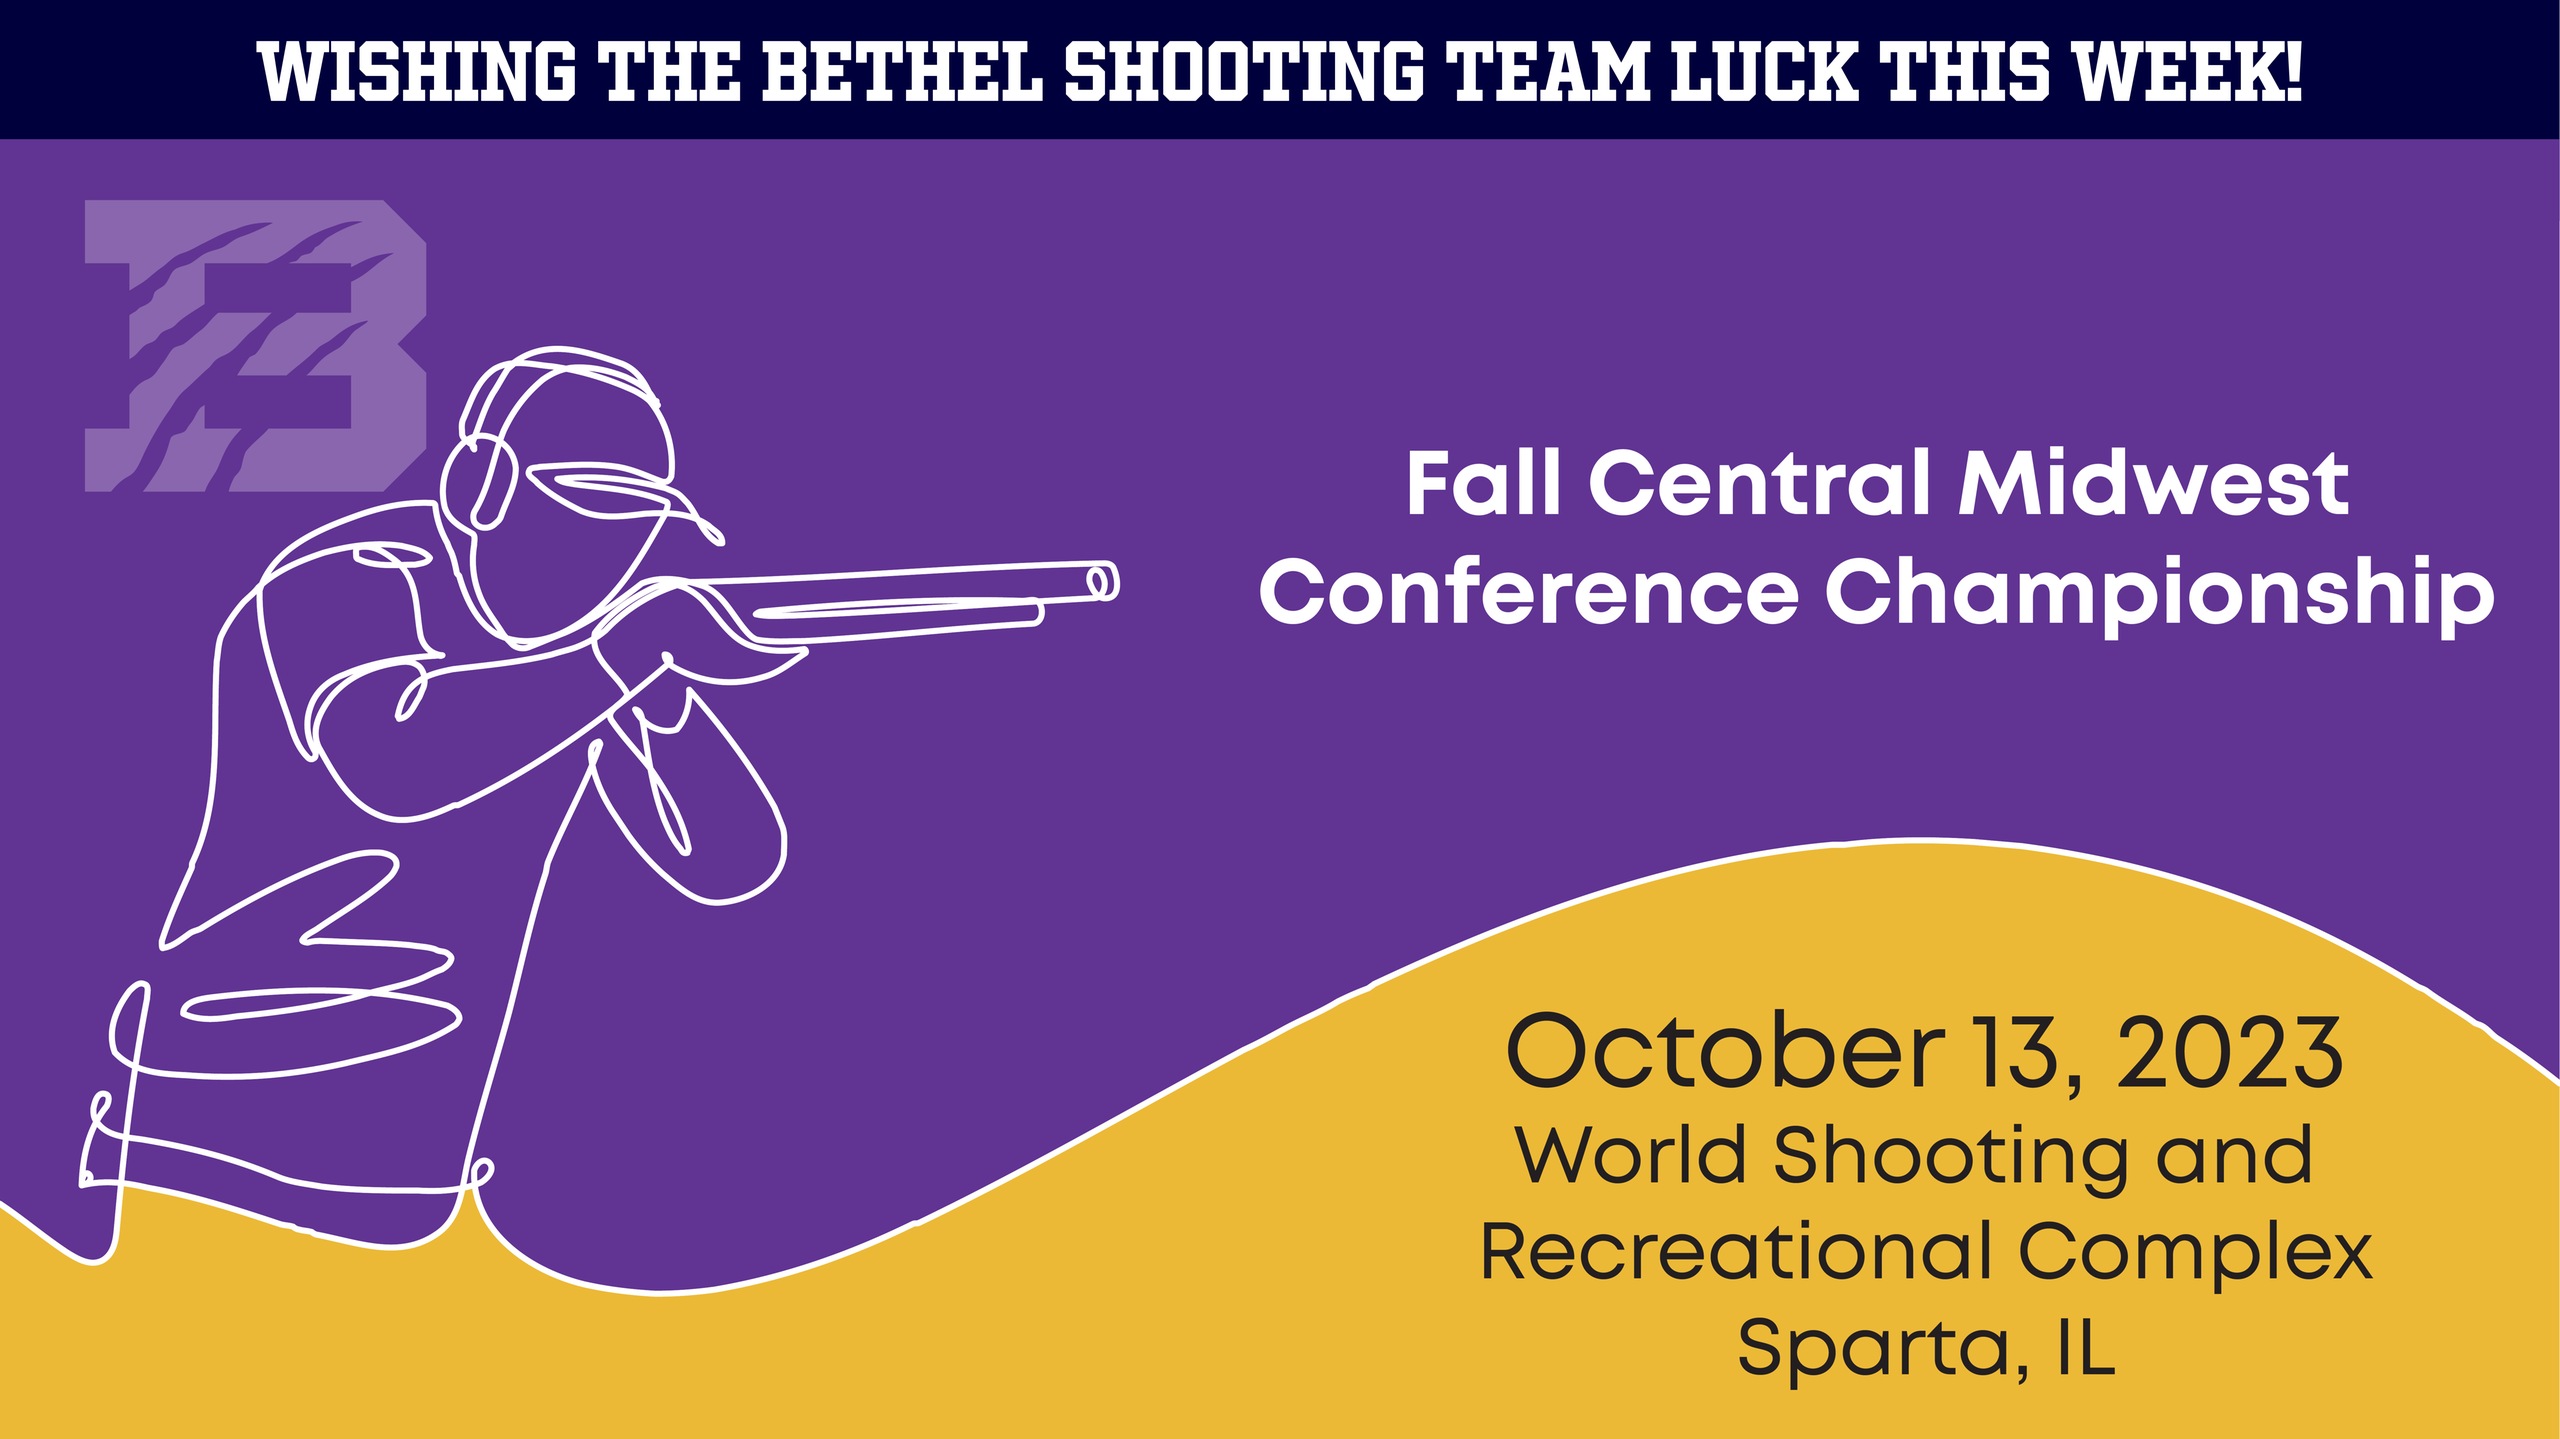 Shooting Cats travel to Fall Central Midwest Conference Championship